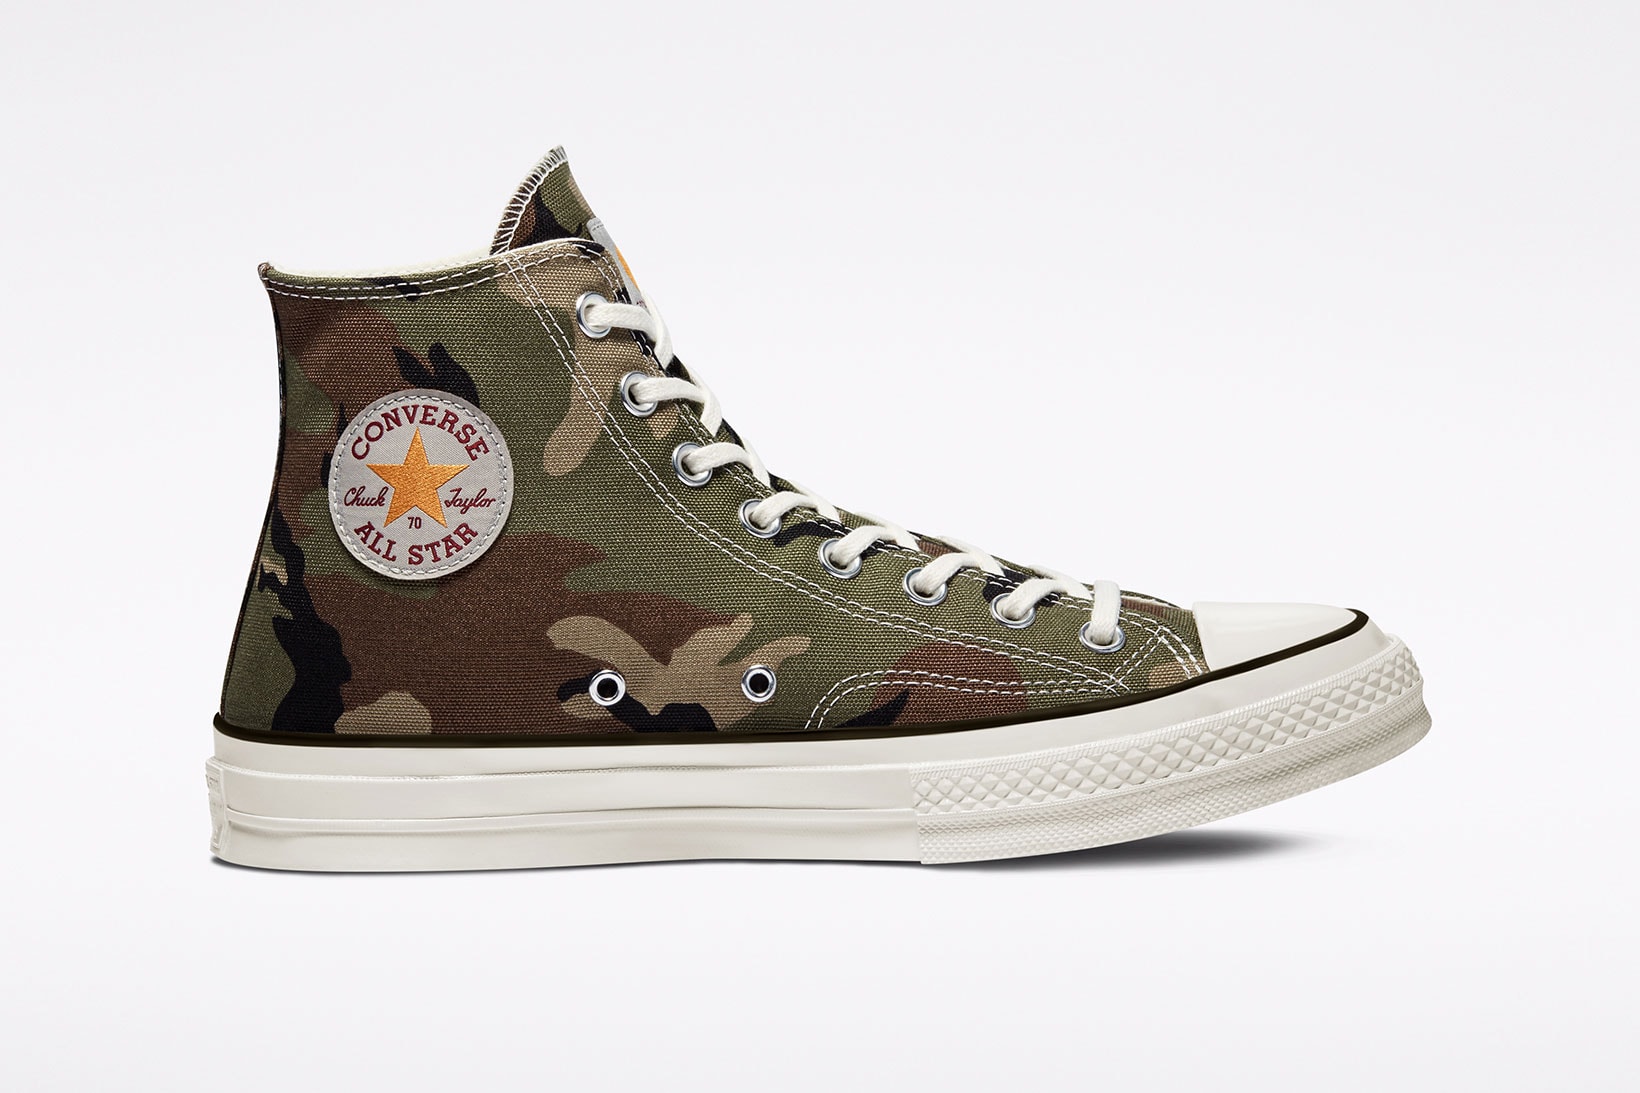 carhartt wip converse chuck 70 icons collaboration sneakers camo lateral logo